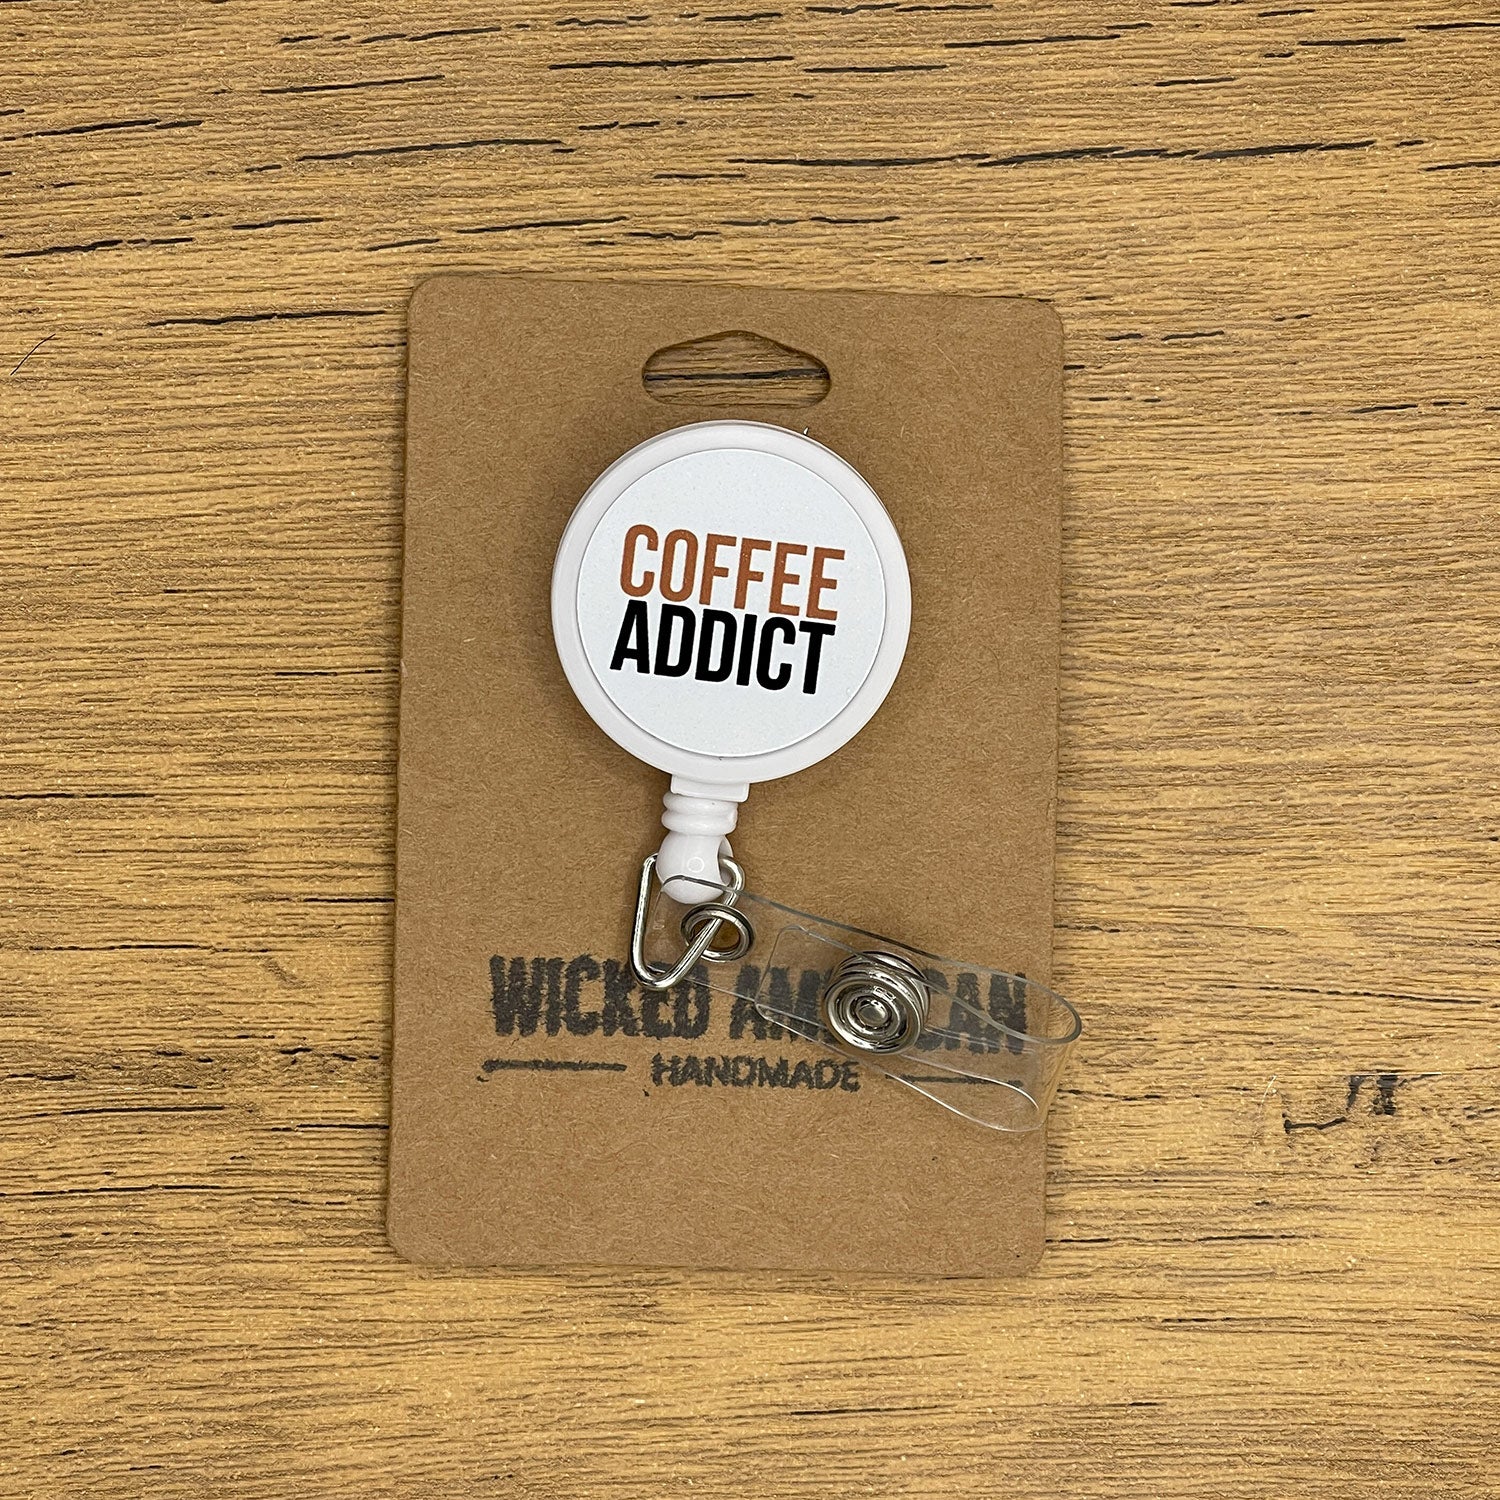 Coffee addict badge reels Powered by coffee